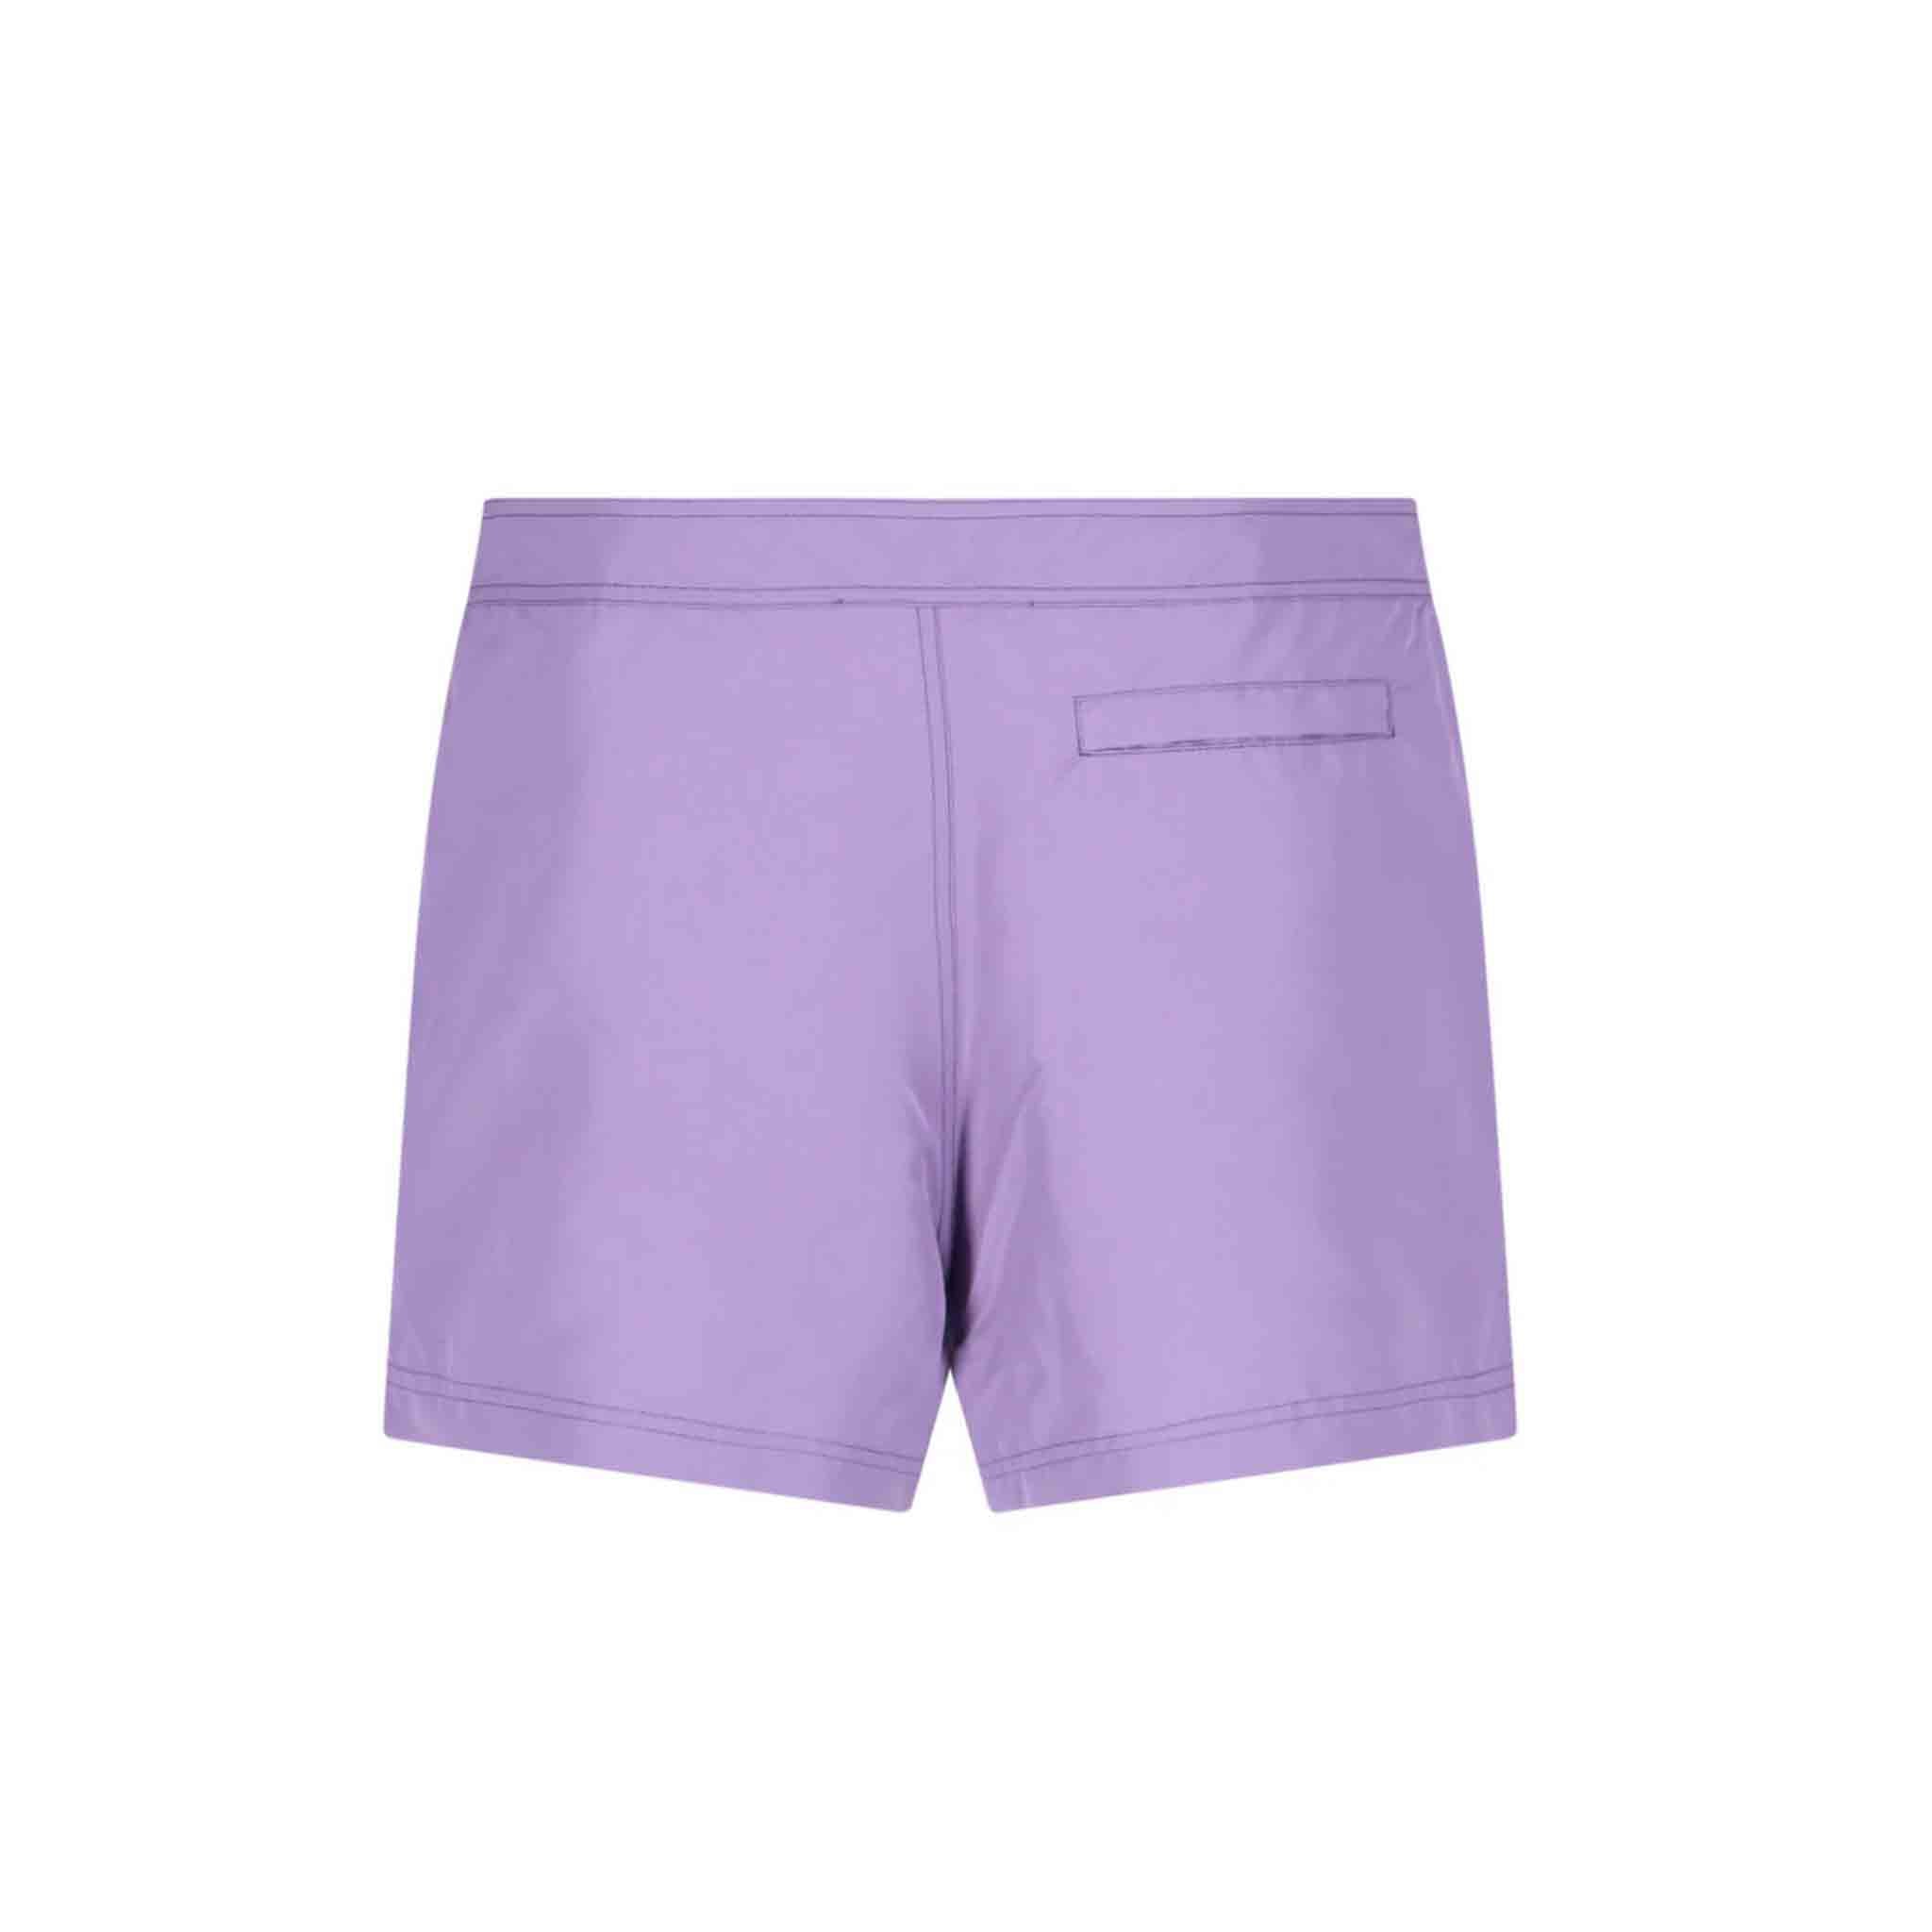 OFF-WHITE Quote Sunrise Swimshorts in Purple